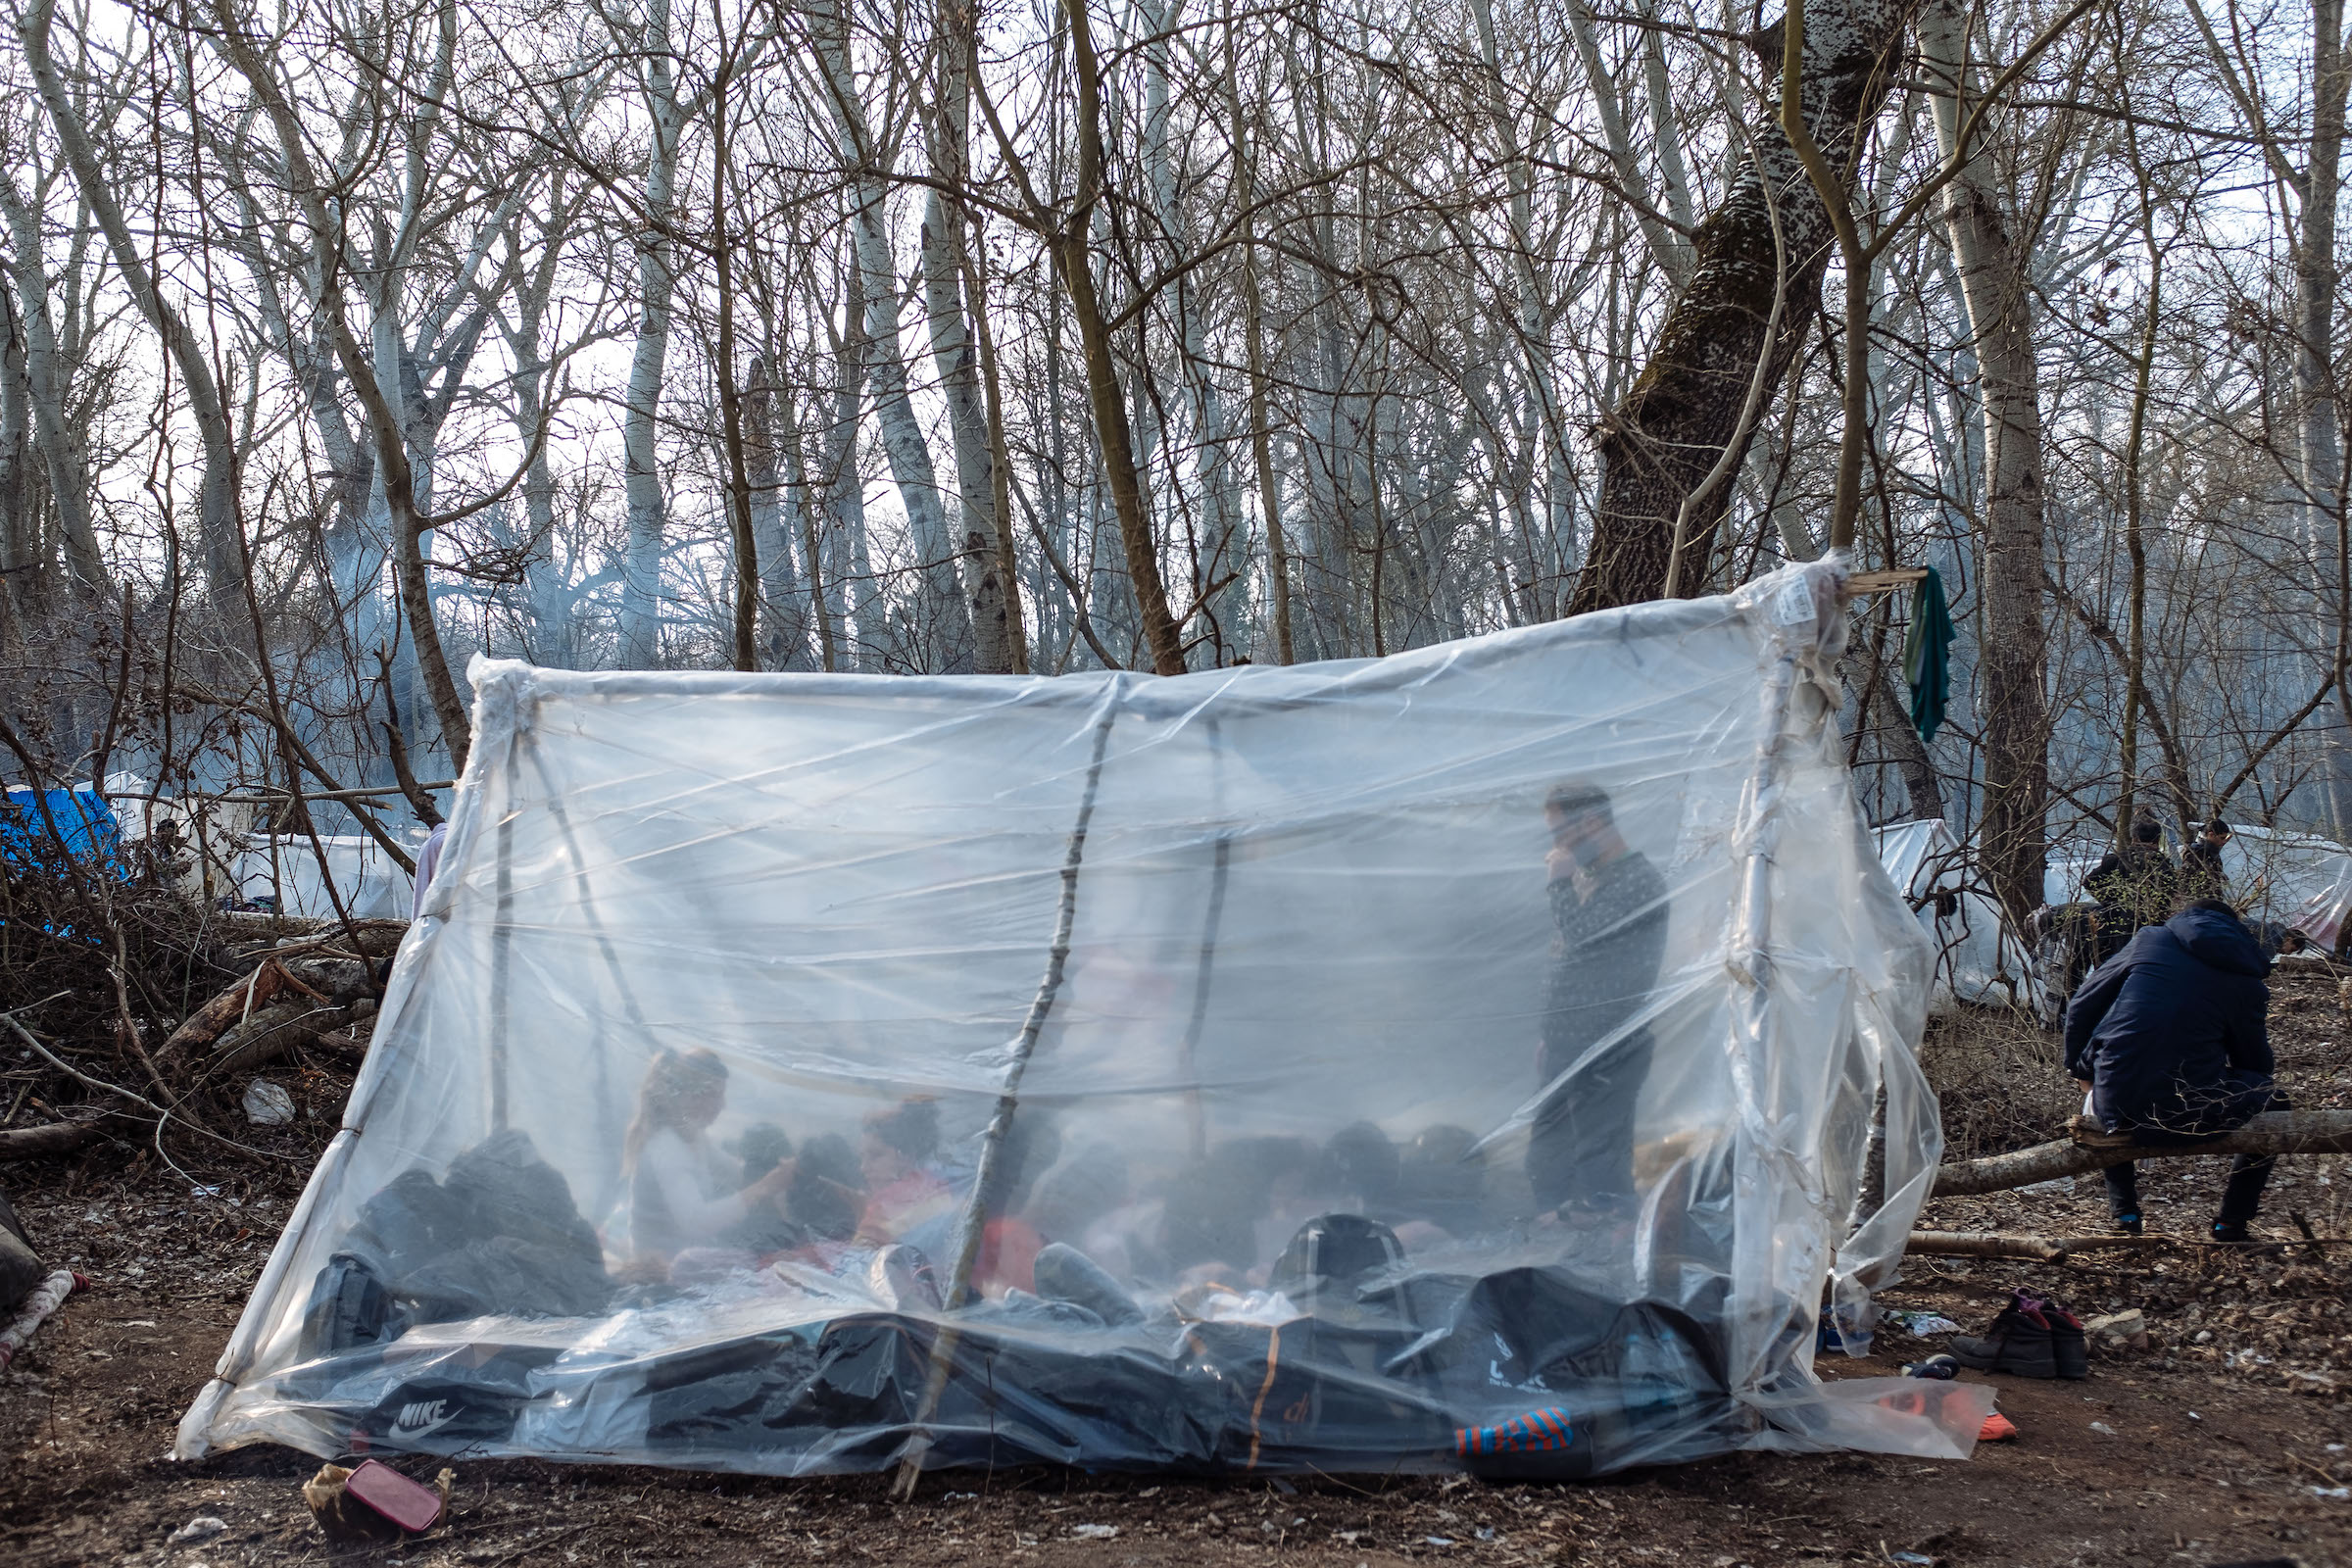 A tent made of propped-up branches, wrapped in plastic. Many migrants slept in the area for days, waiting for a chance to cross the border. (Emin Ozmen—Magnum Photos for TIME)